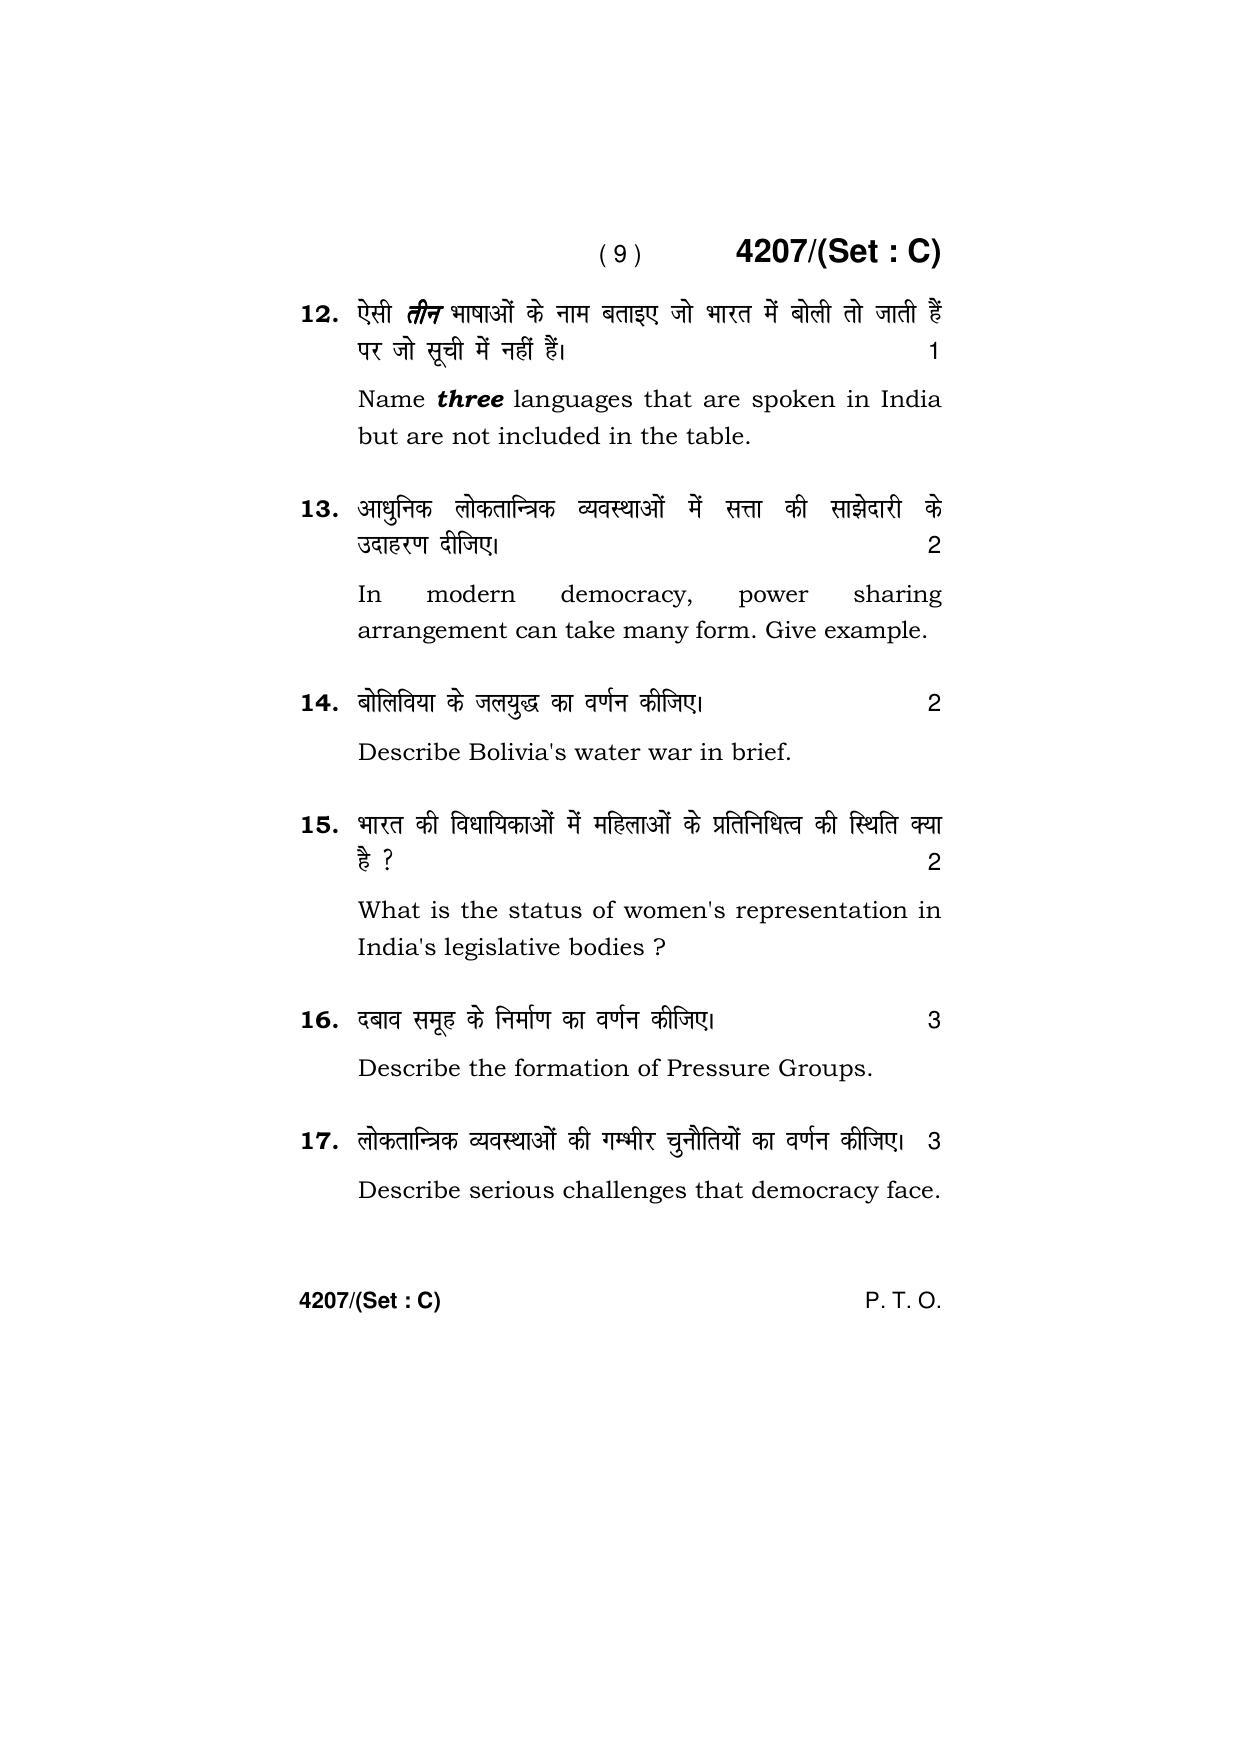 Haryana Board HBSE Class 10 Social Science (All Set) 2019 Question Paper - Page 39